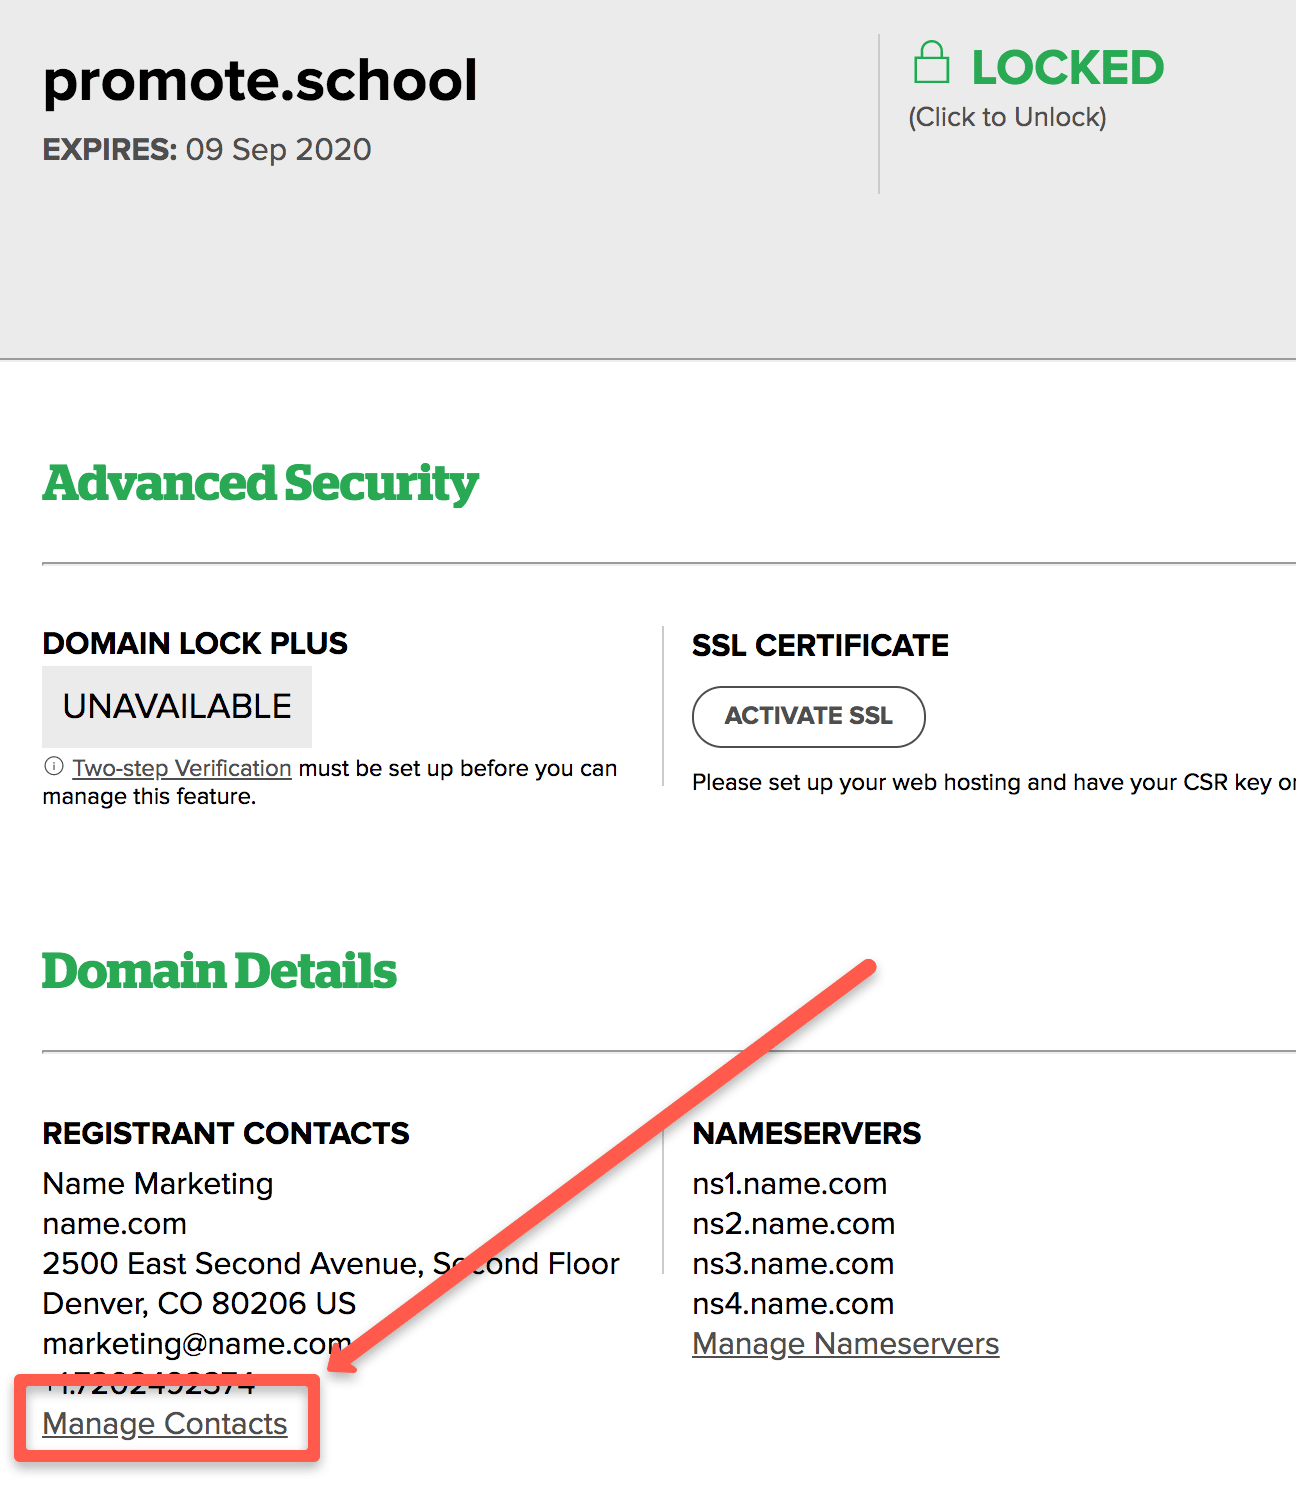 Updating domain contact information